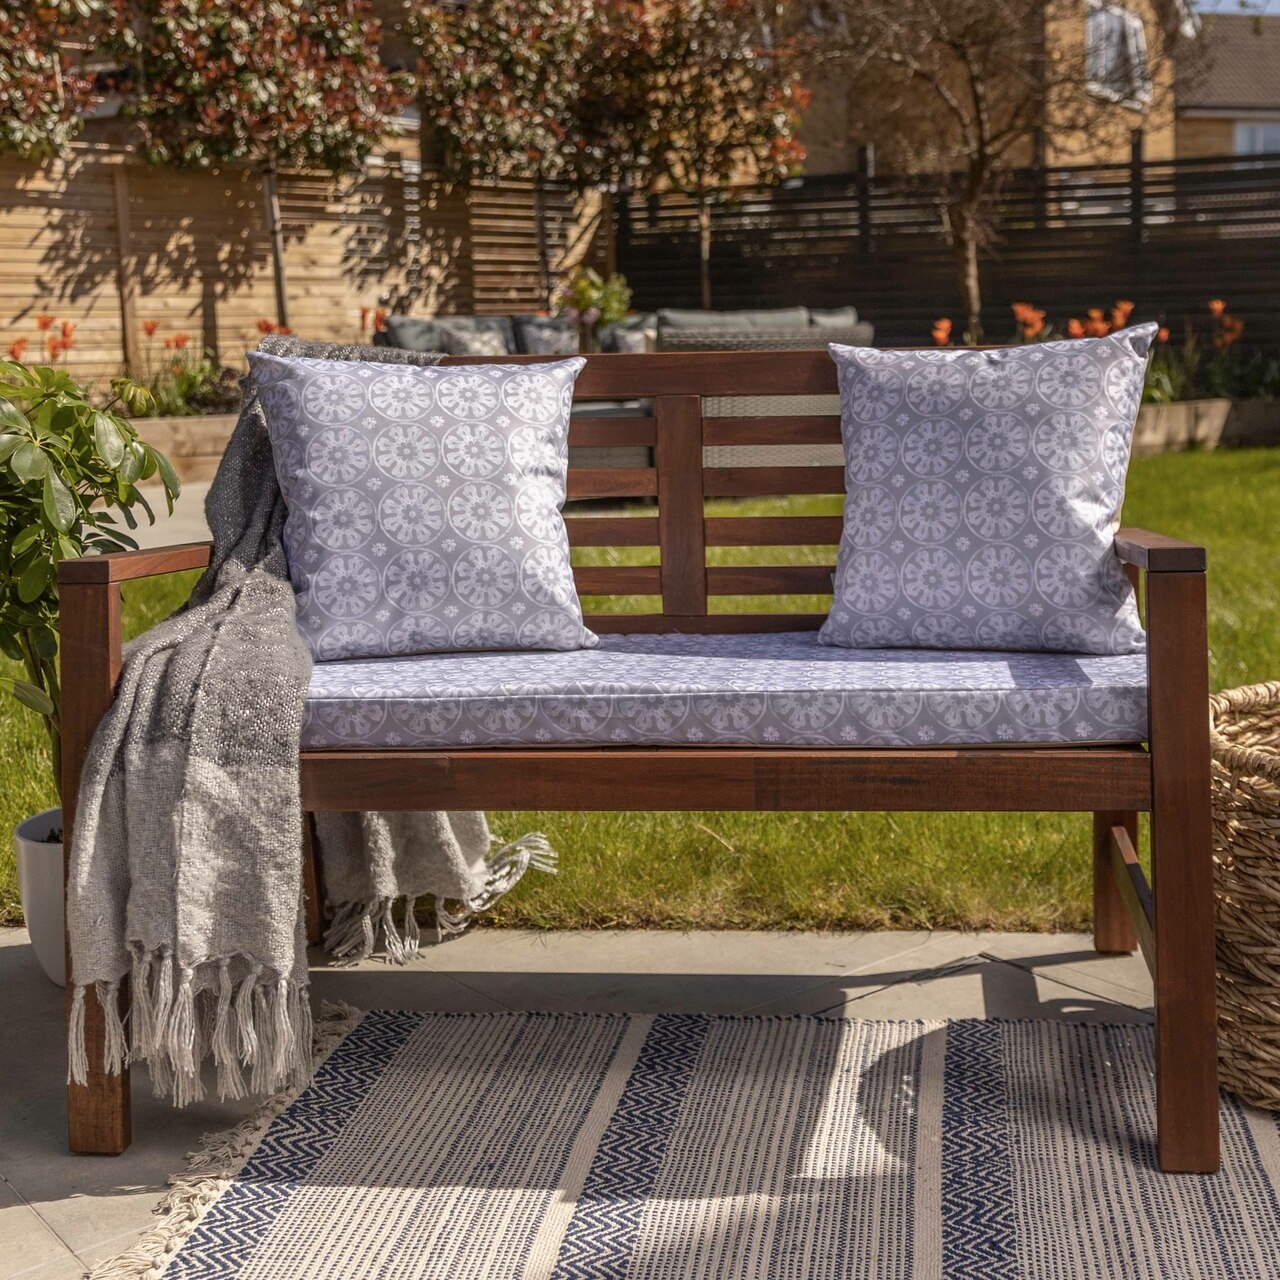 Celina Digby Luxury Water Resistant Garden Outdoor Bench Seat Pad – Casablanca Grey (Available in 2-Seater or 3-Seater Size) (144cm x 54cm 6cm)